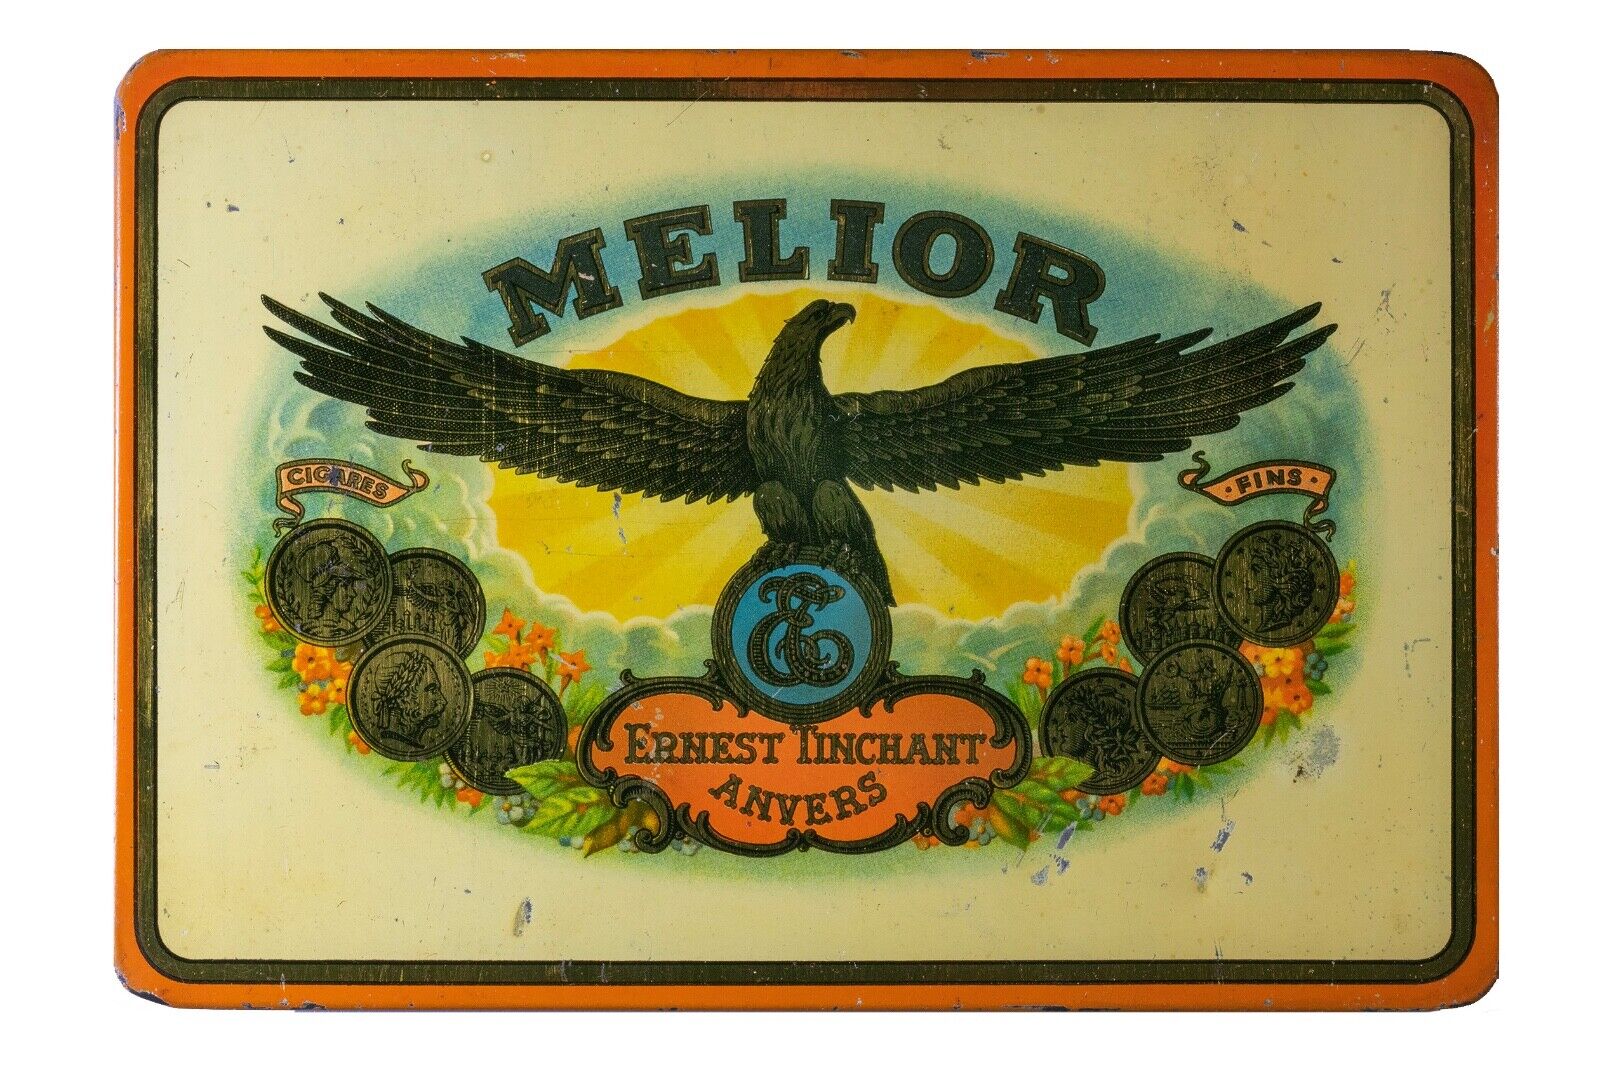 Rare 1930s Belgian “Melior Victoria“ litho hinged 10 cigar tin in very good cond